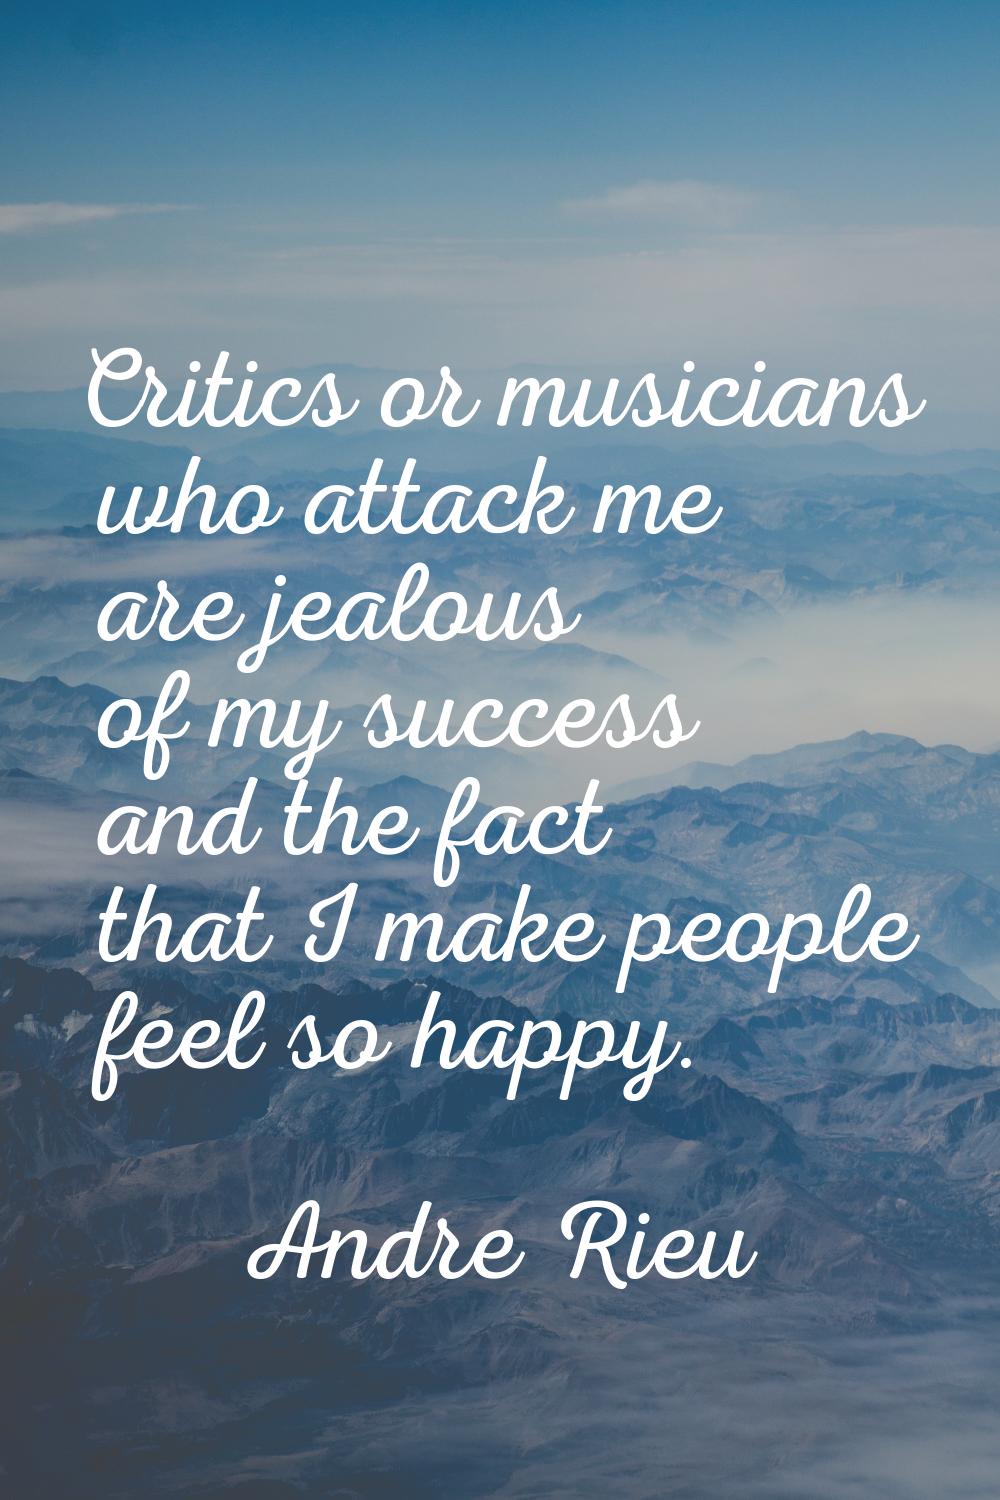 Critics or musicians who attack me are jealous of my success and the fact that I make people feel s